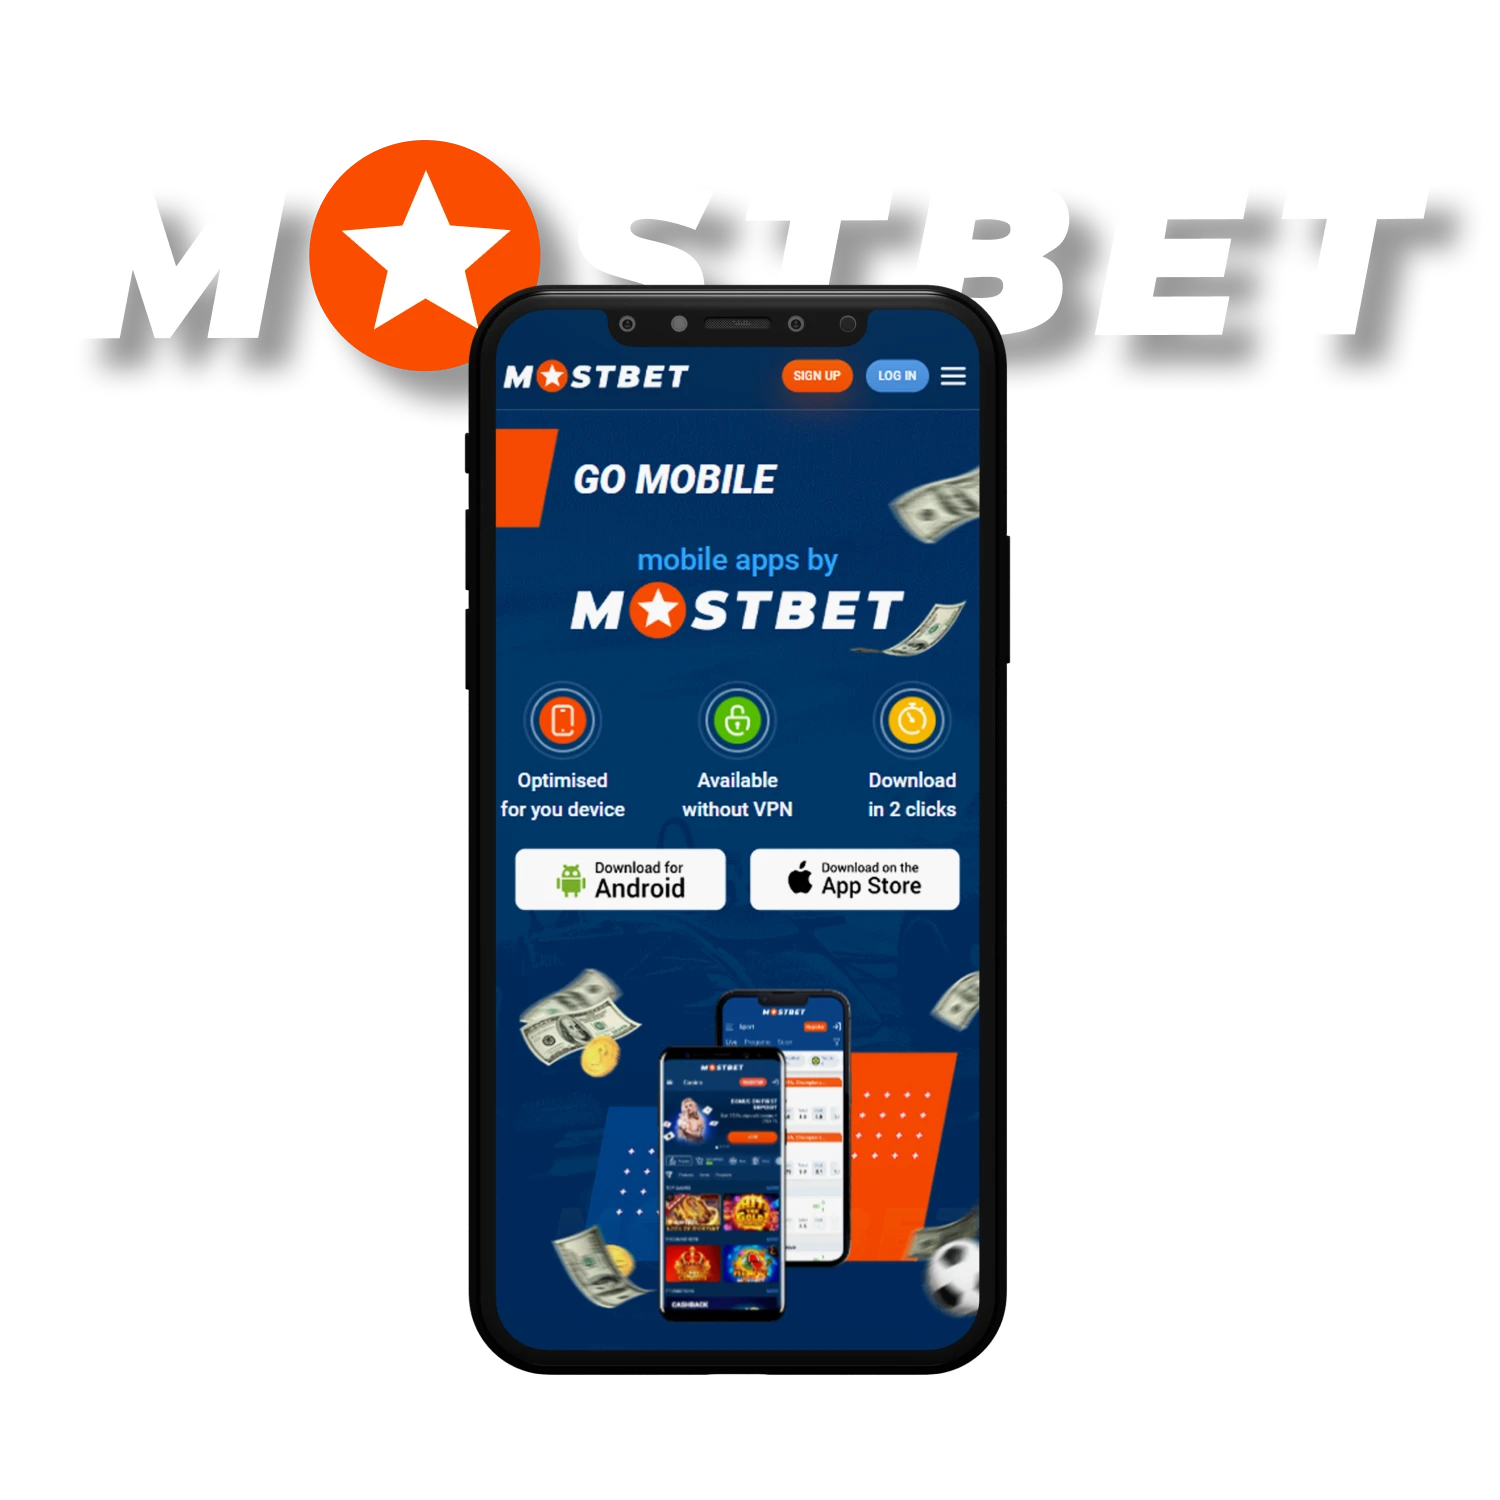 Find out how to install the Mostbet app on your mobile device for free.